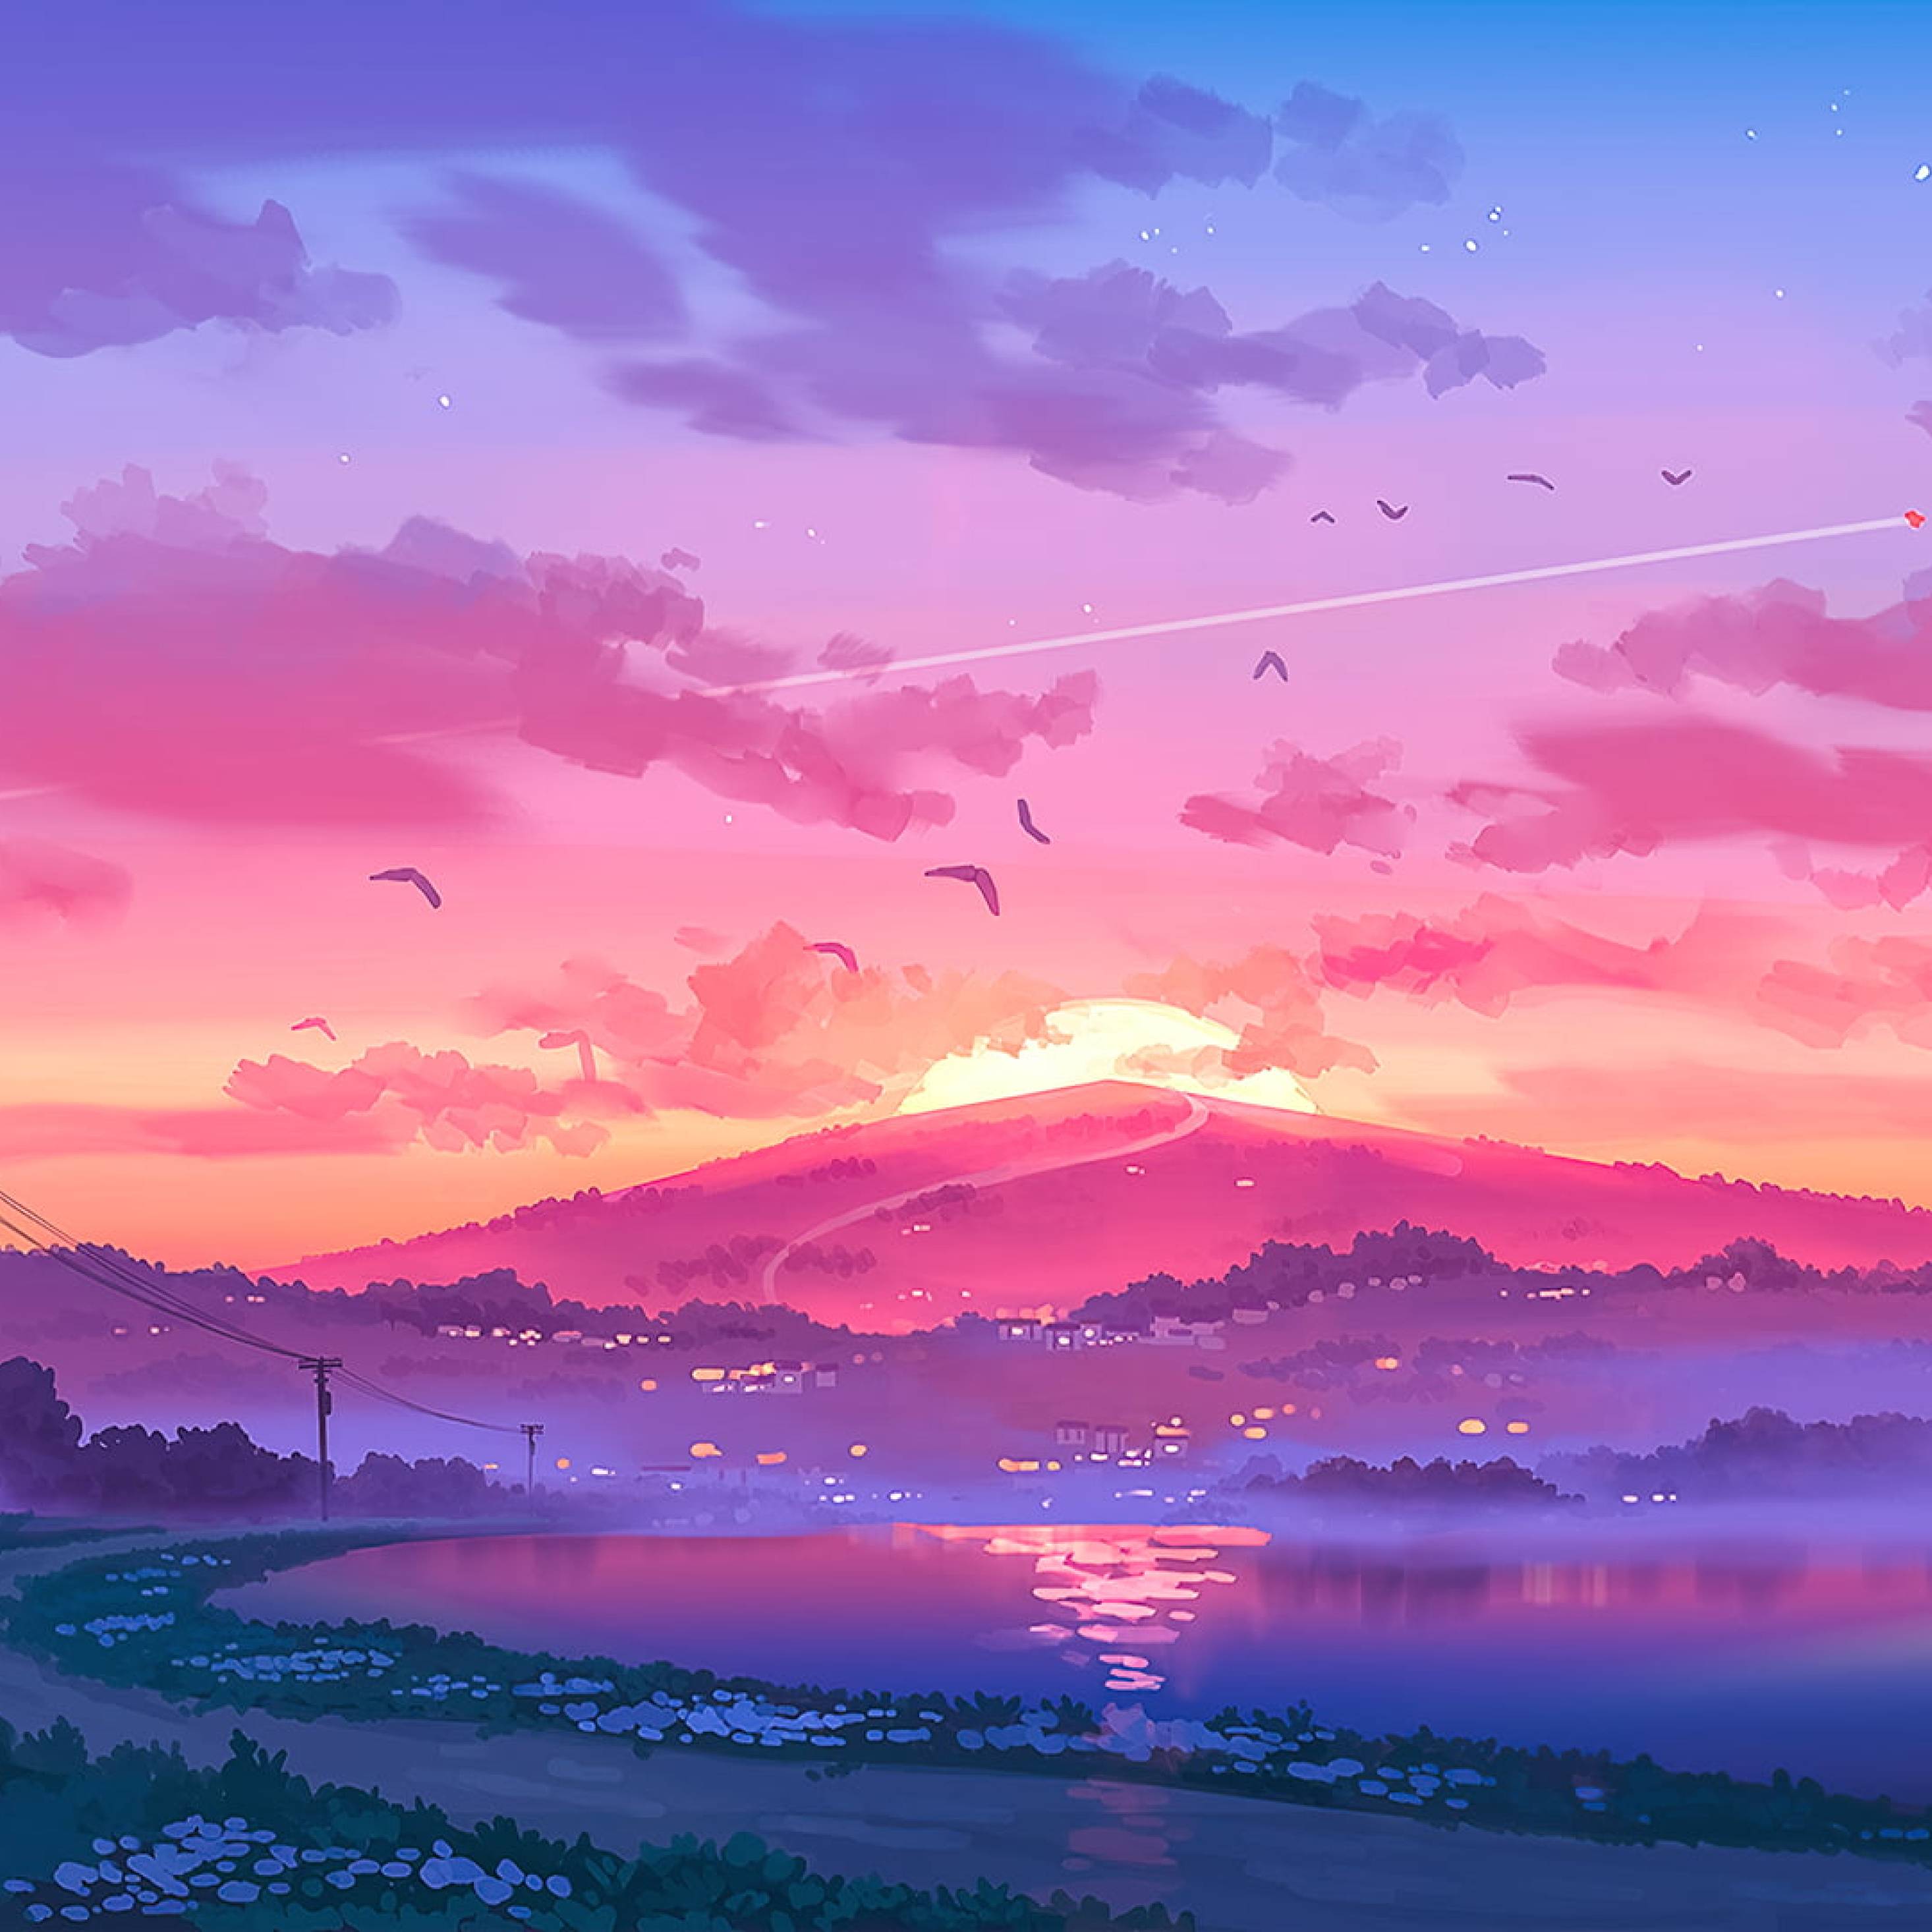 A painting of the sunset over water - Pixel art